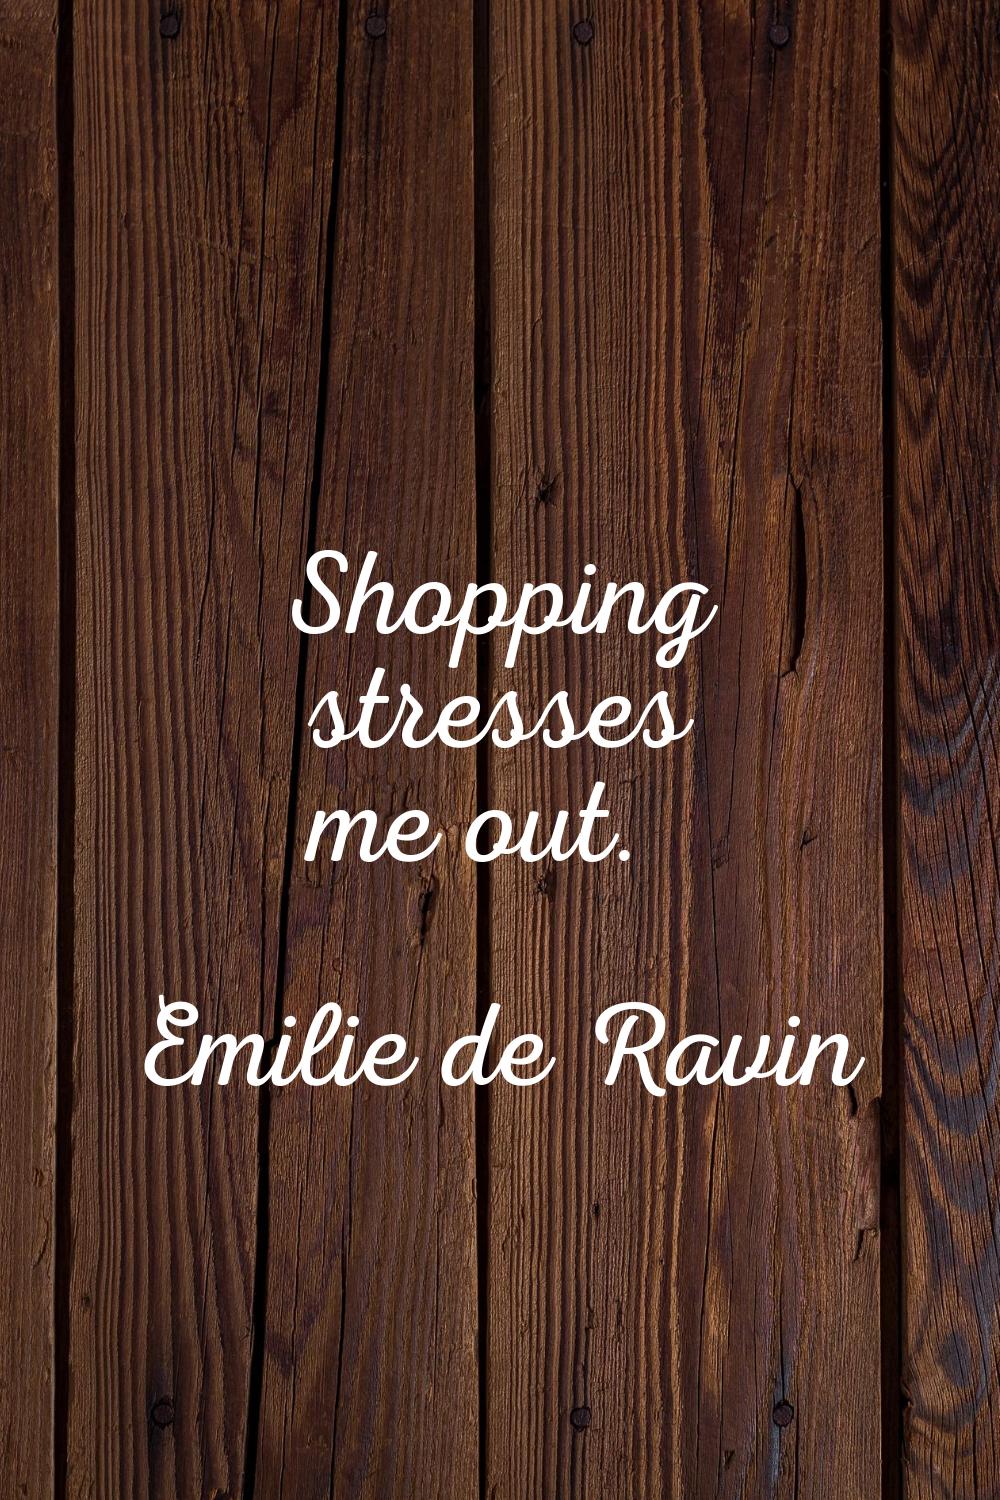 Shopping stresses me out.